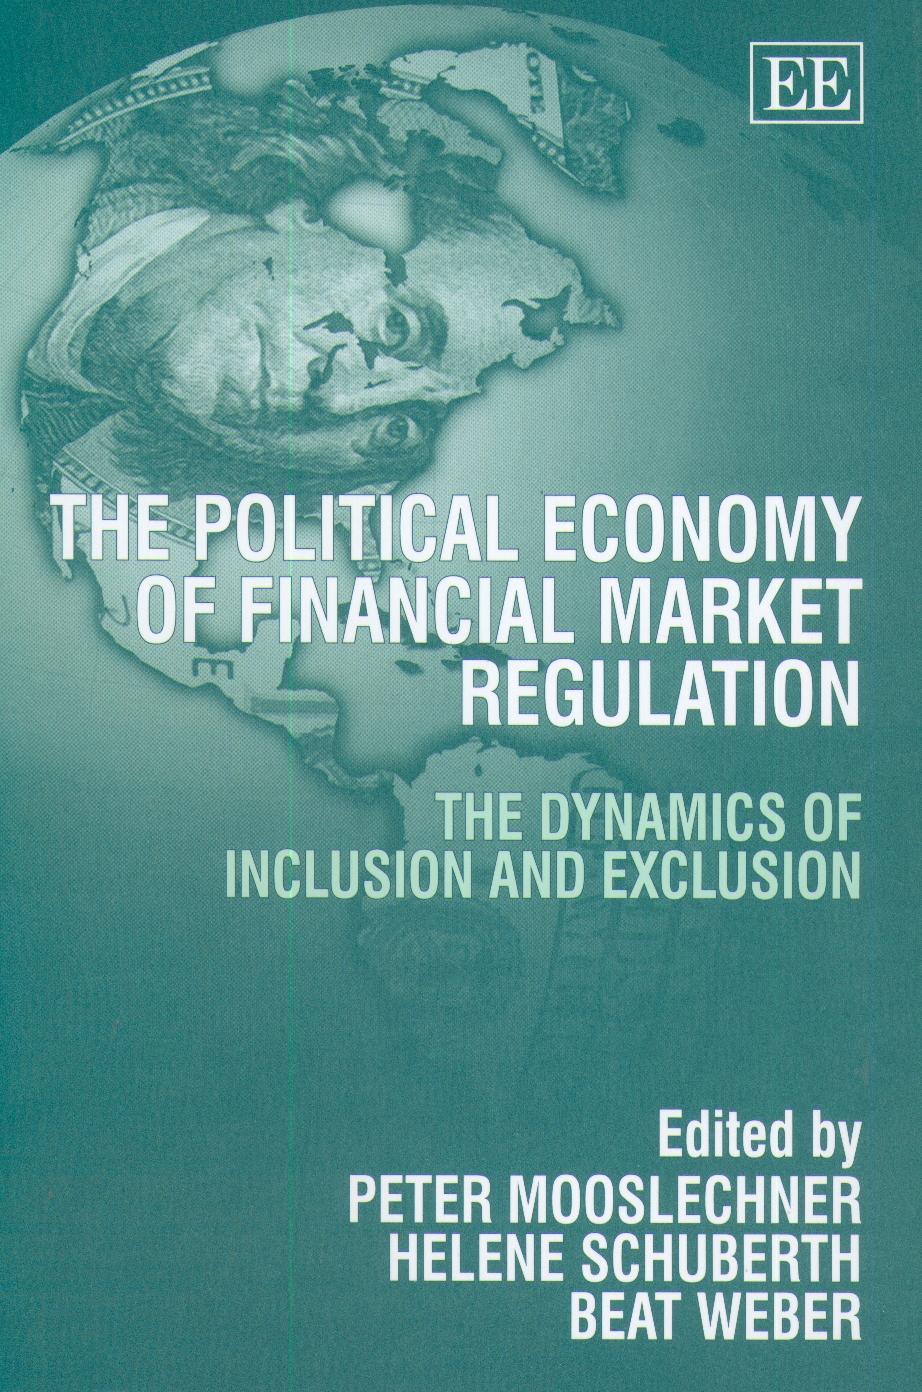 The Political Economy Of Financial Market Regulations: The Dynamics Of Inclusion And Exclusion